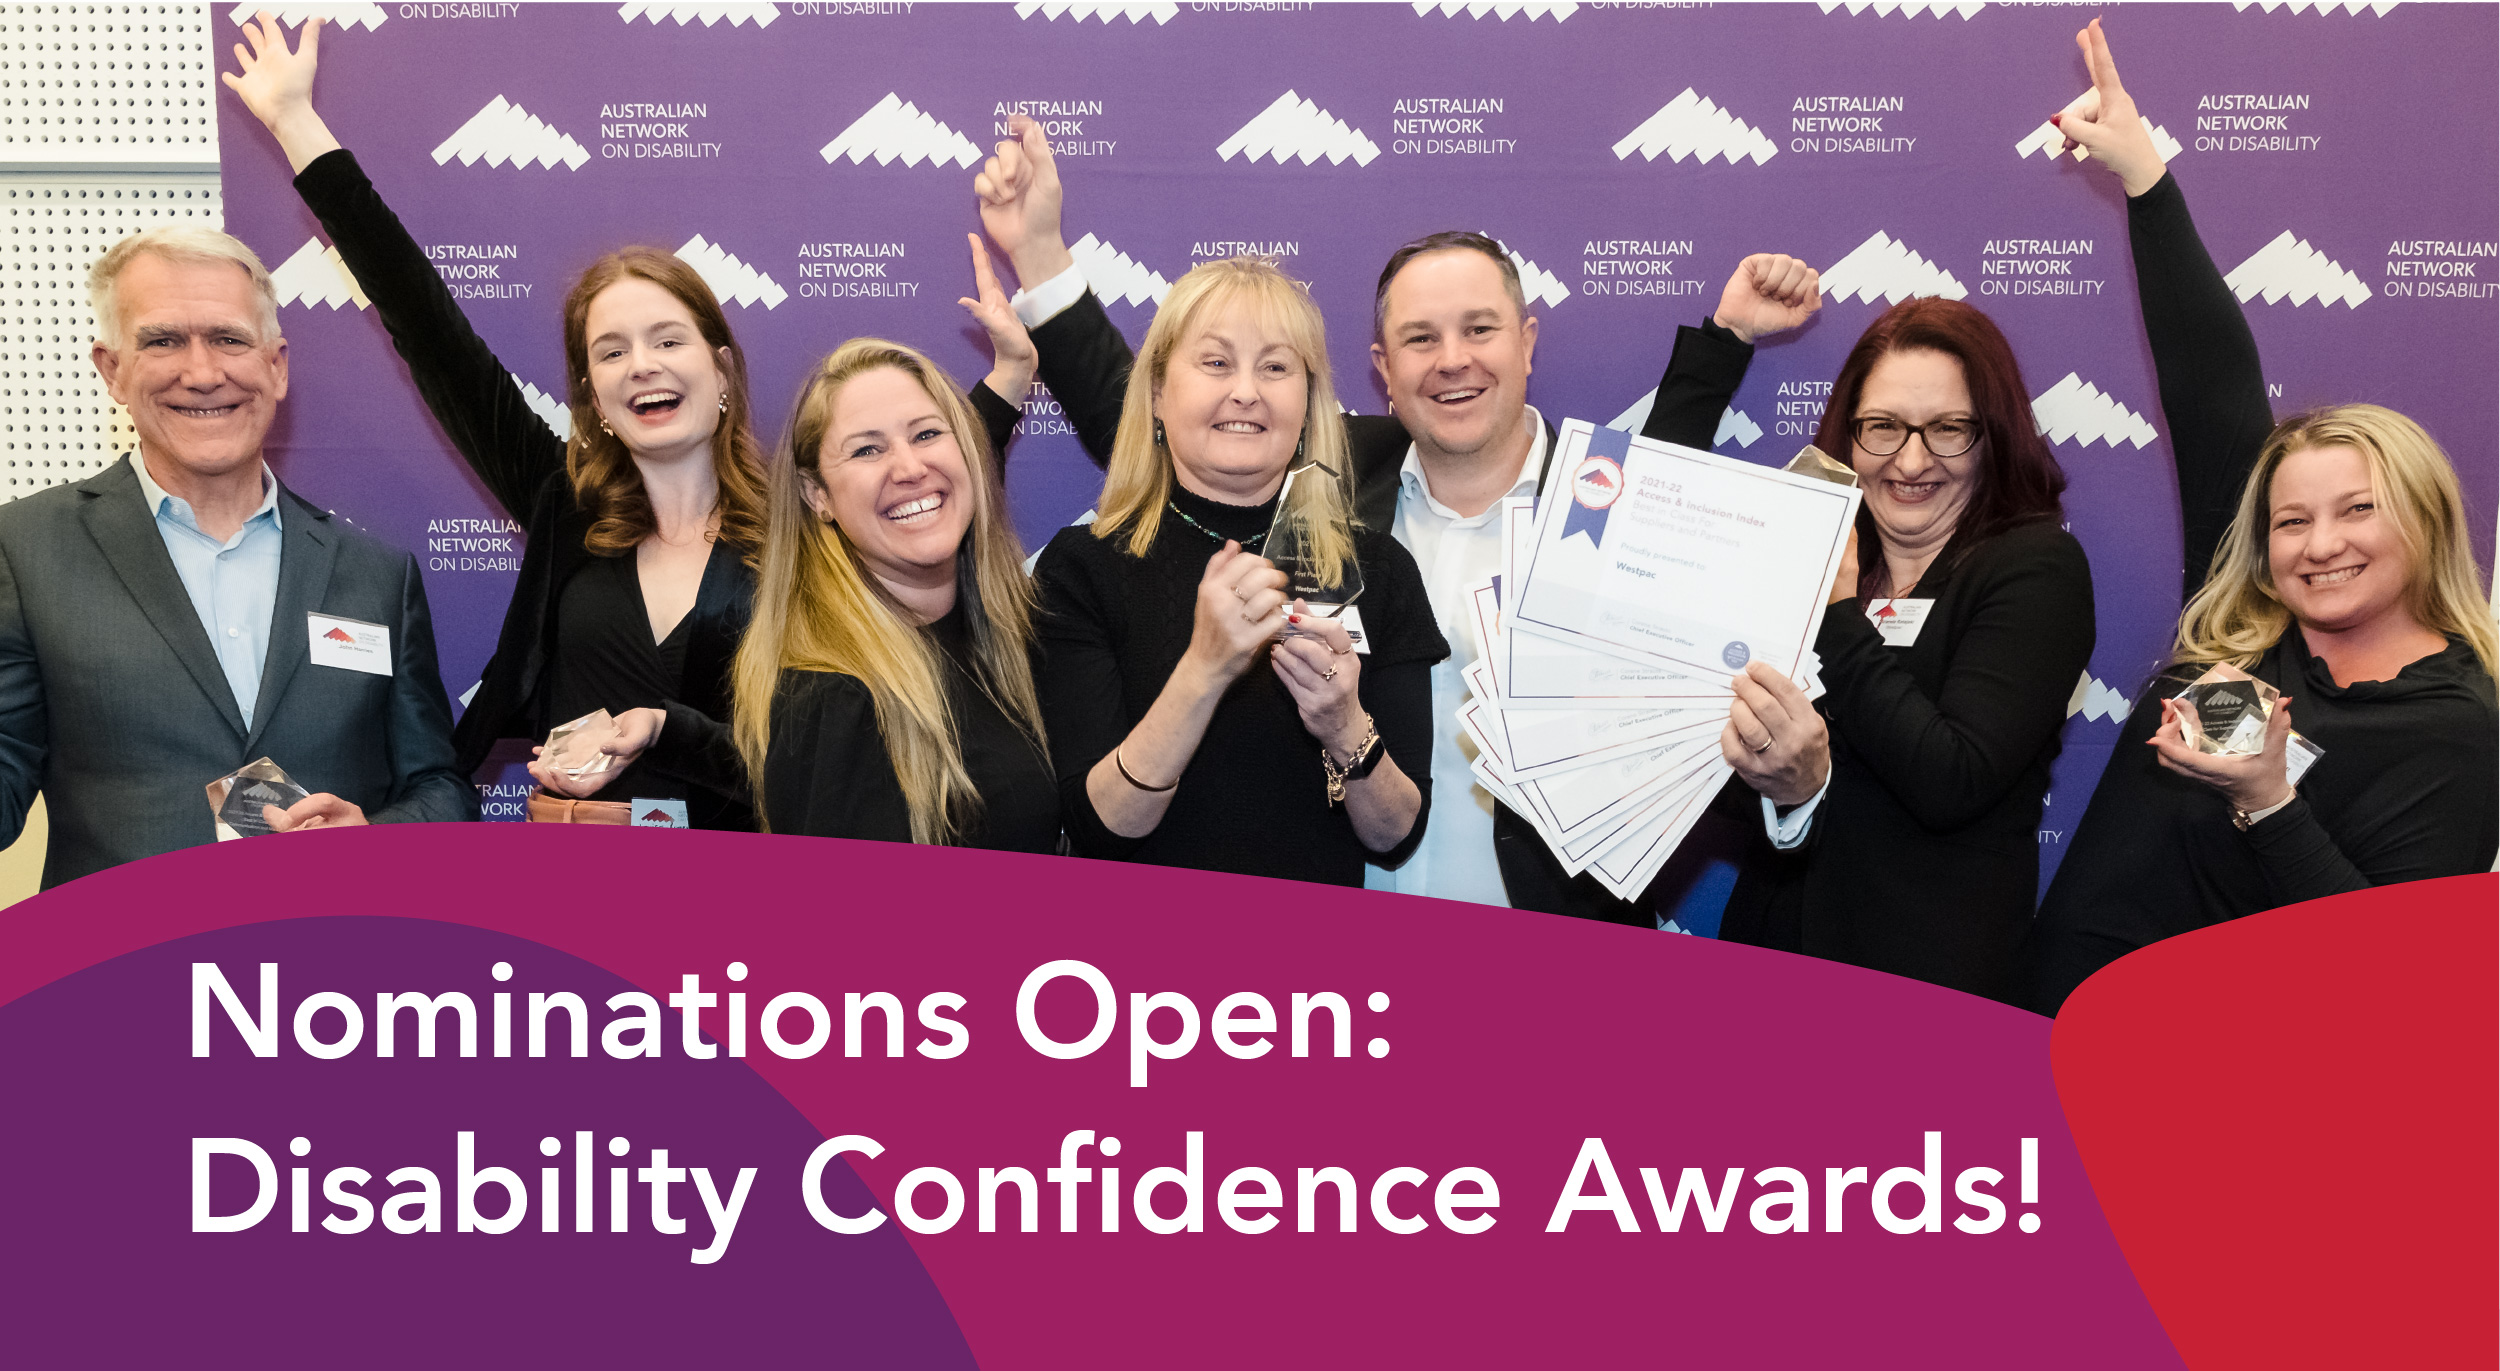 Nominations Open: Disability Confidence Awards! Westpac team holding their awards, with their hands up celebrating. 